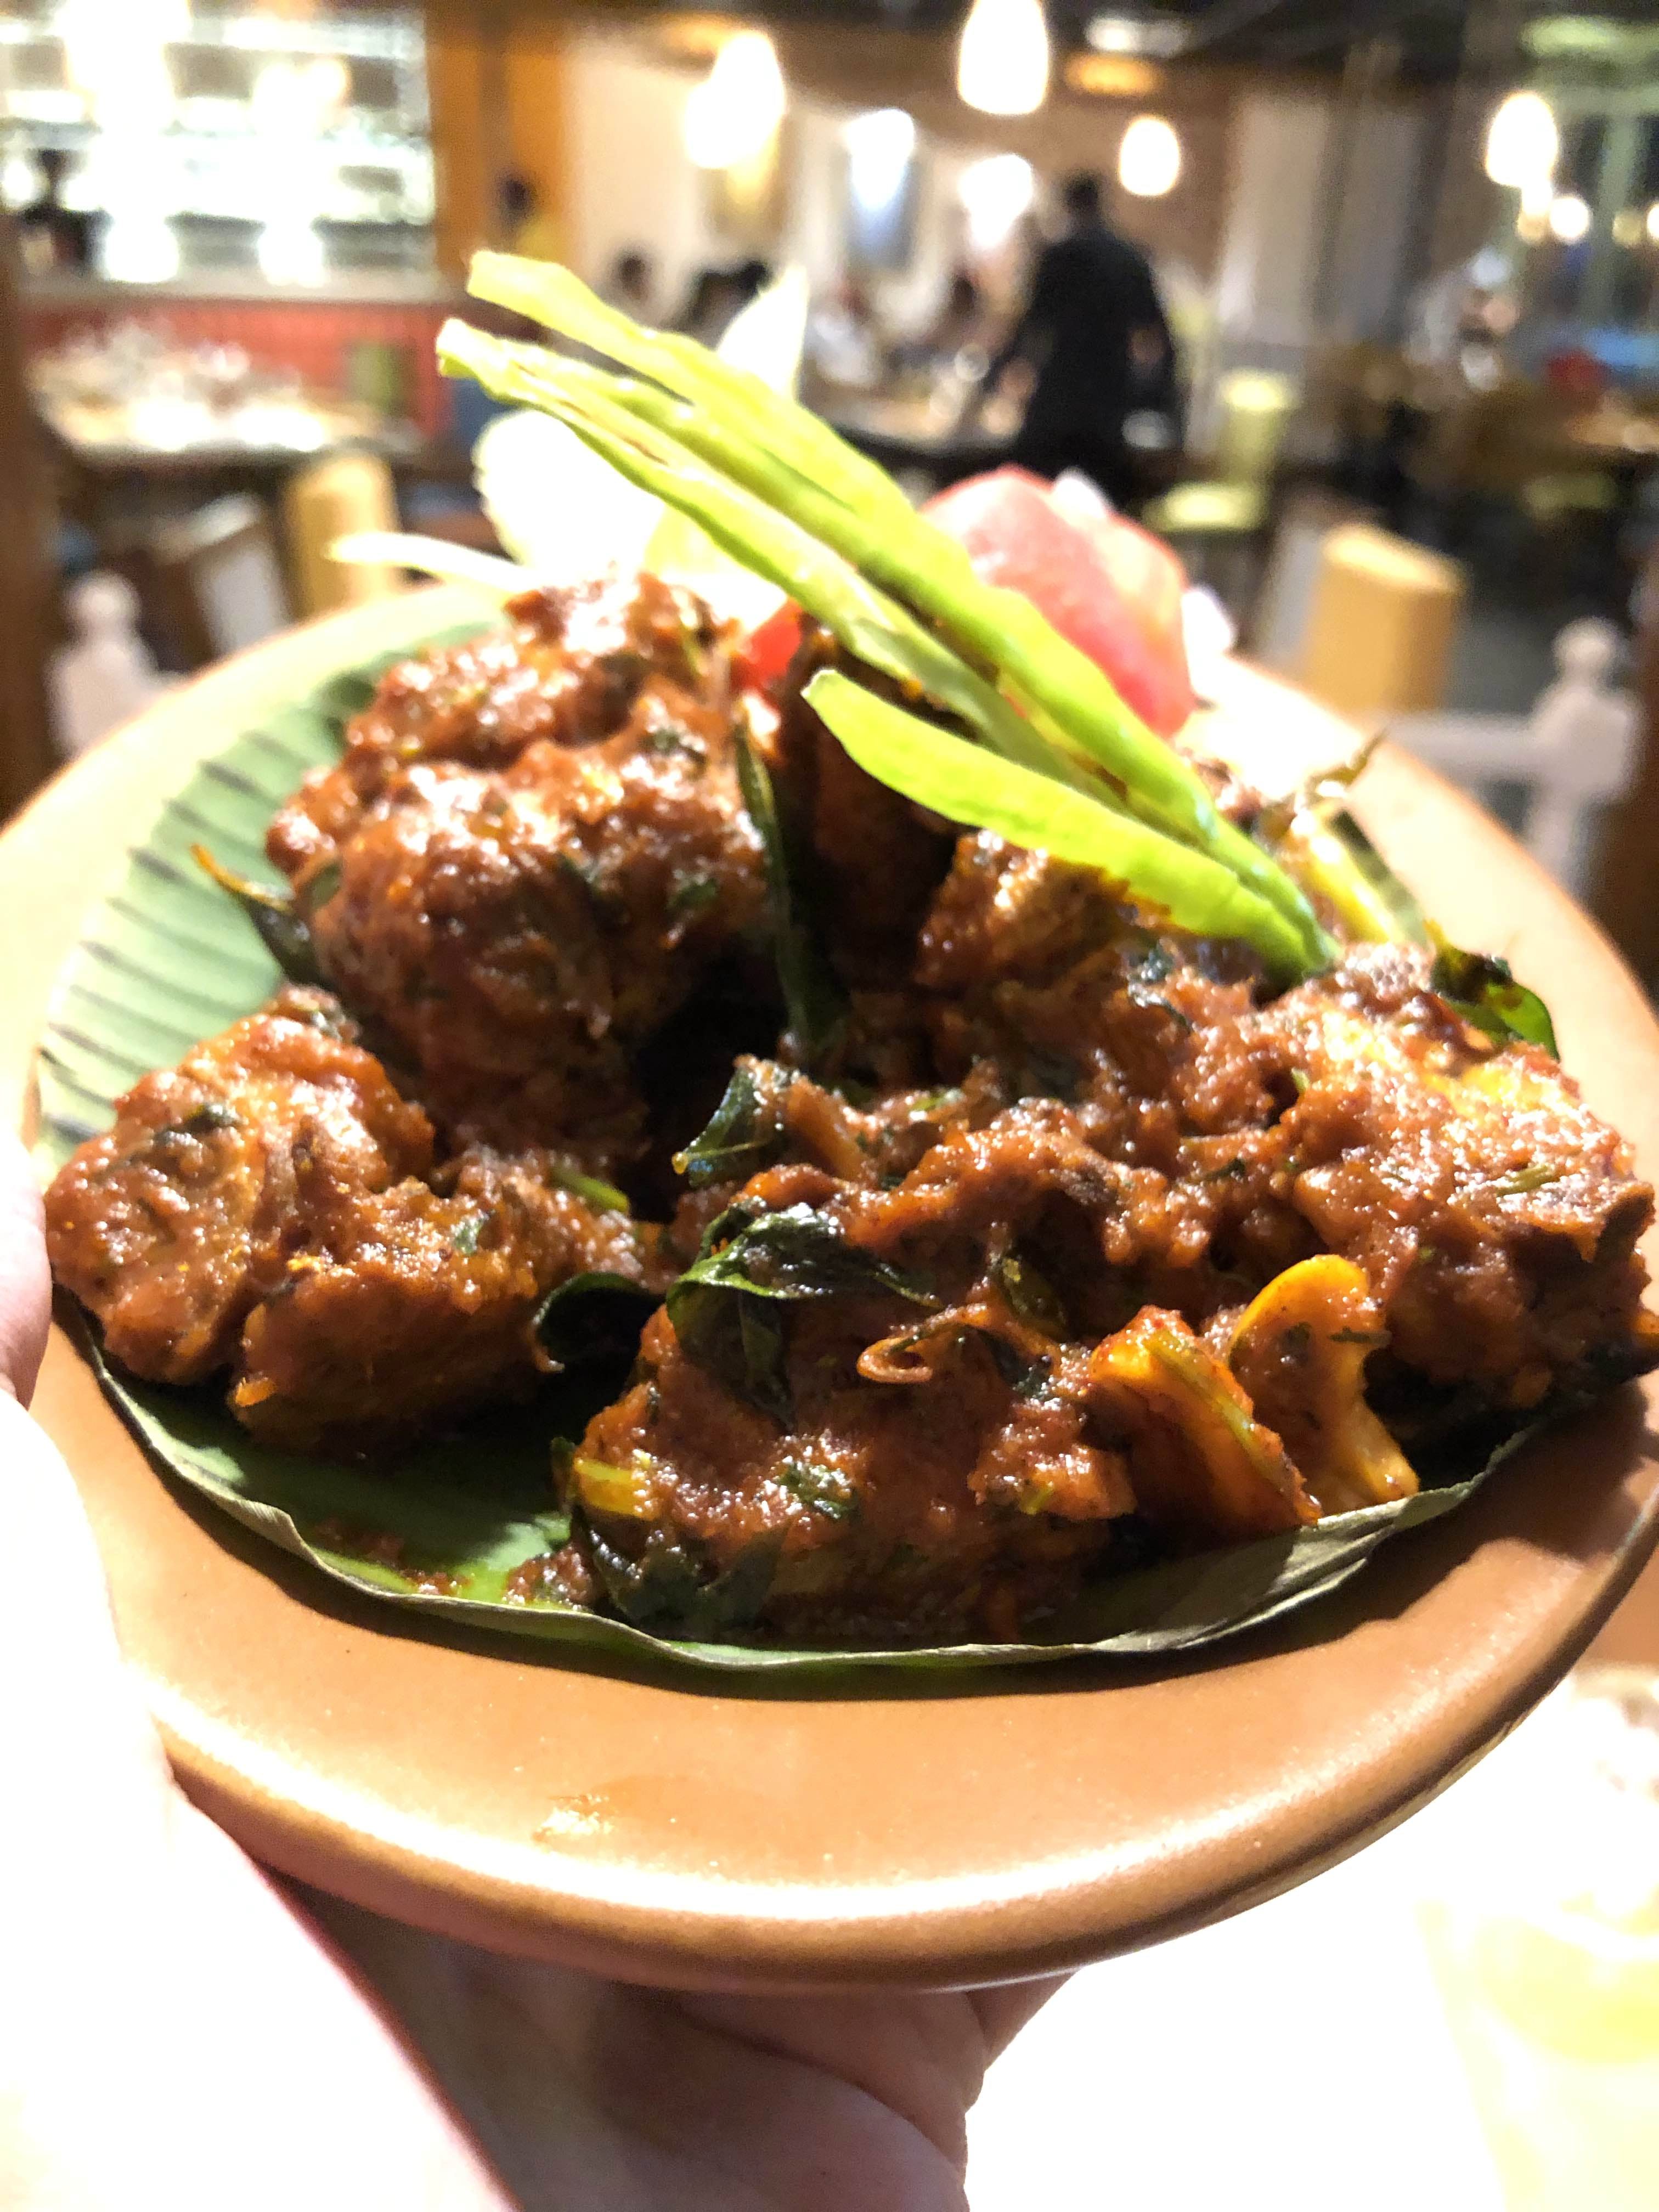 Dish,Food,Cuisine,Ingredient,Meat,Produce,Rendang,Recipe,Mongolian beef,Curry